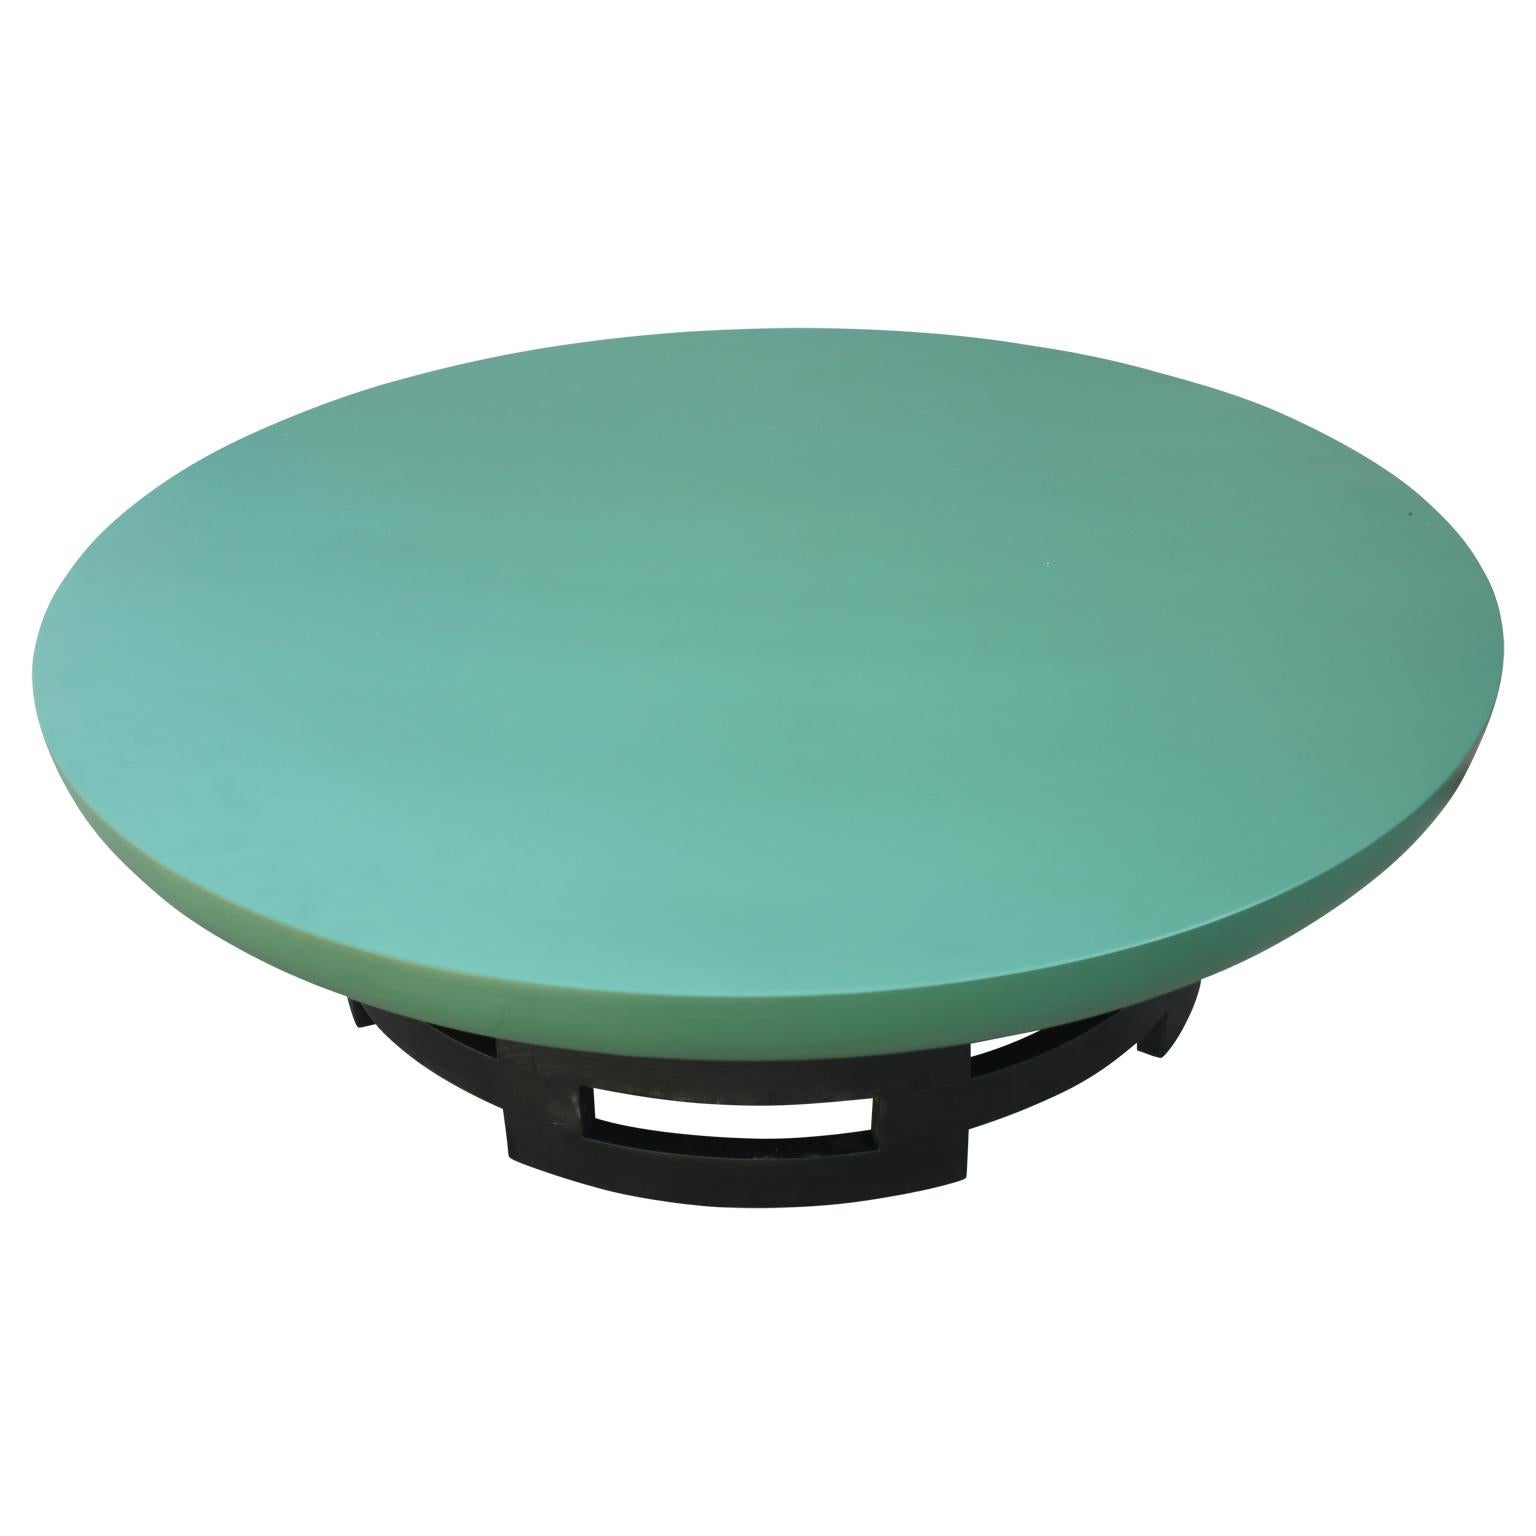 Lovely round black and emerald green coffee table designed by Muller and Barringer as a part of Kittinger's 